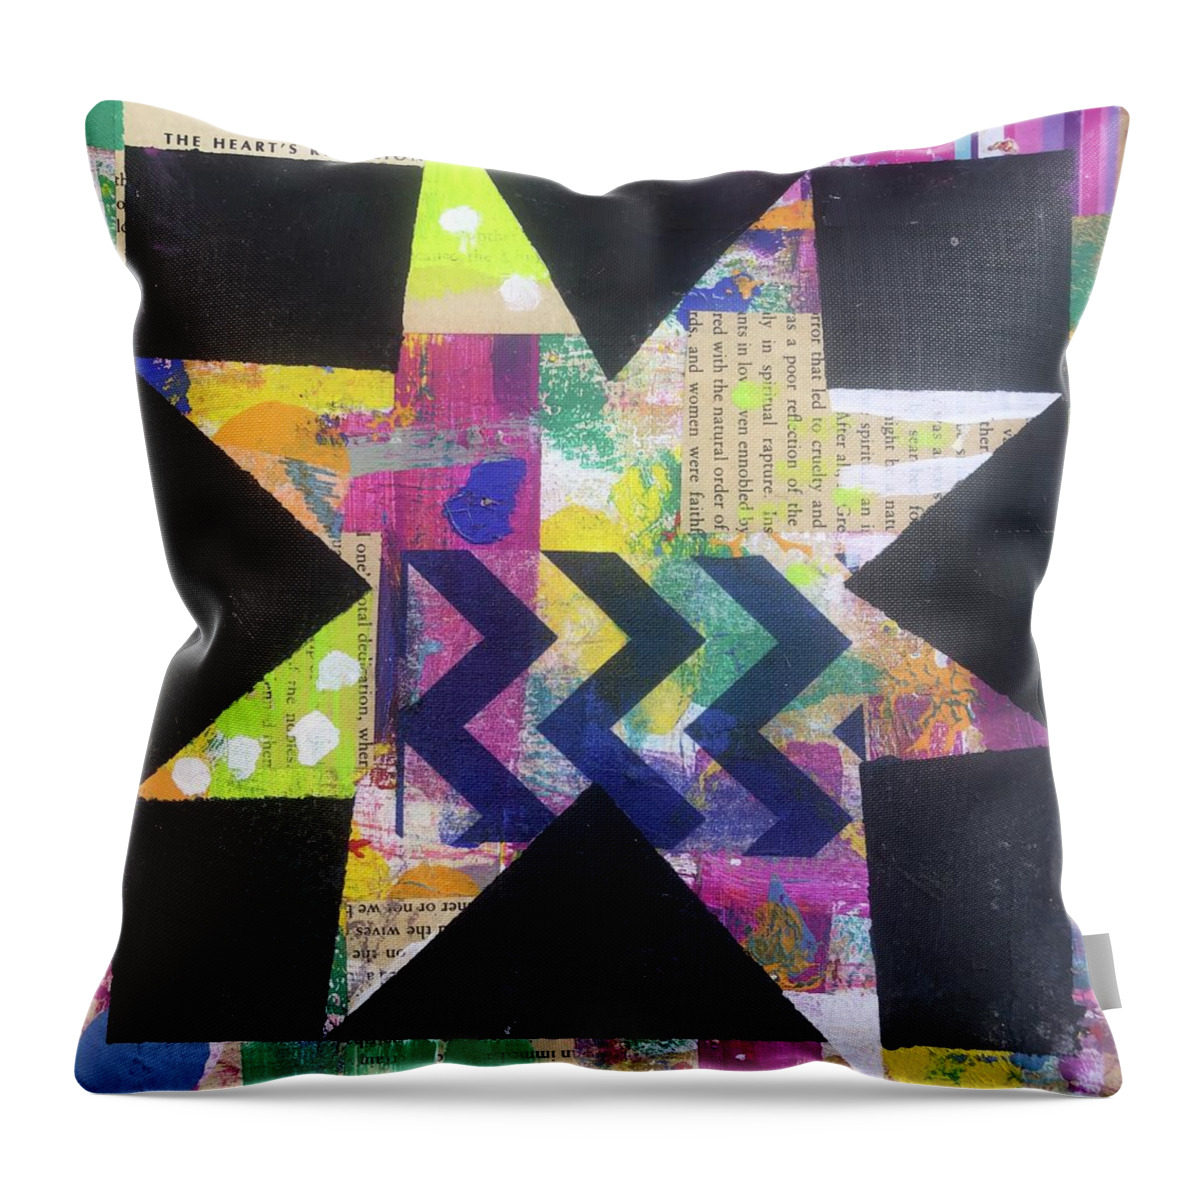 Star Throw Pillow featuring the painting Heart's Rebellion by Cyndie Katz